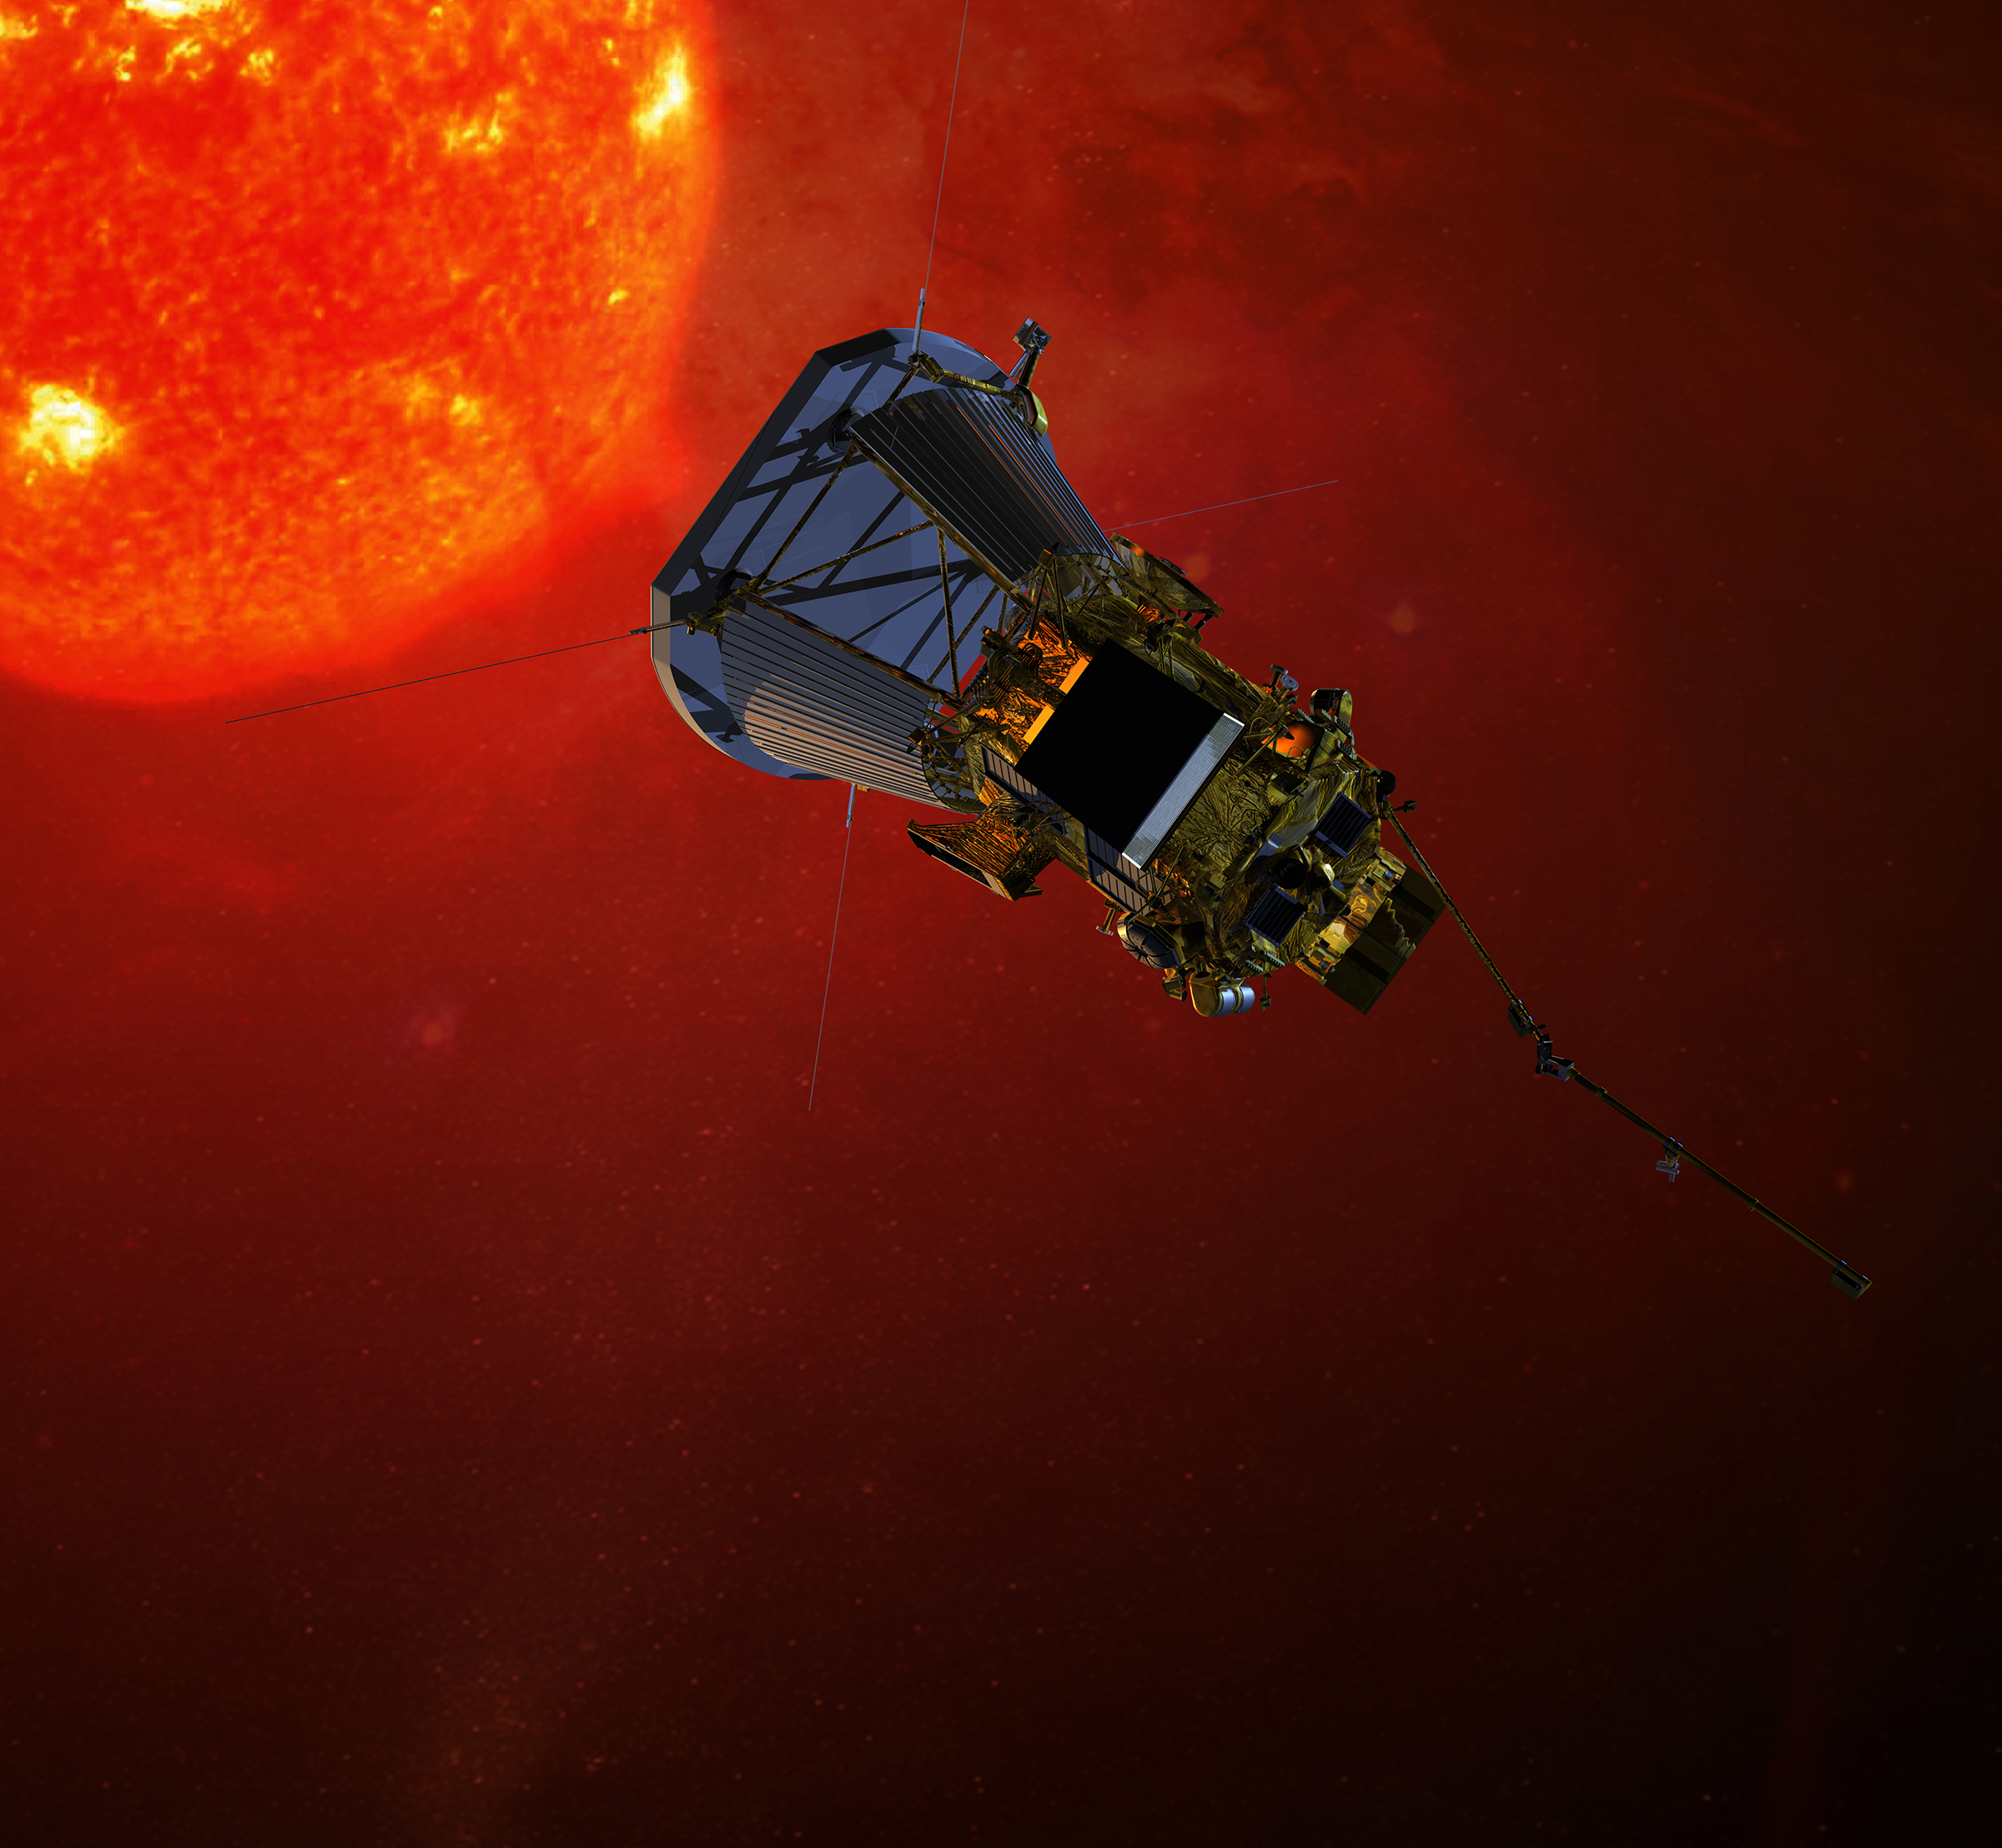 Artist’s impression of NASA’s Solar Probe Plus spacecraft on approach to the sun. Set to launch in 2018, Solar Probe Plus will orbit the sun 24 times, closing in with the help of seven Venus flybys. The spacecraft will carry 10 science instruments specifically designed to solve two key puzzles of solar physics: why the sun’s outer atmosphere is so much hotter than the sun’s visible surface, and what accelerates the solar wind that affects Earth and our solar system. The Johns Hopkins University Applied Physics Laboratory manages the Solar Probe Plus mission for NASA and leads the spacecraft fabrication, integration and testing effort.